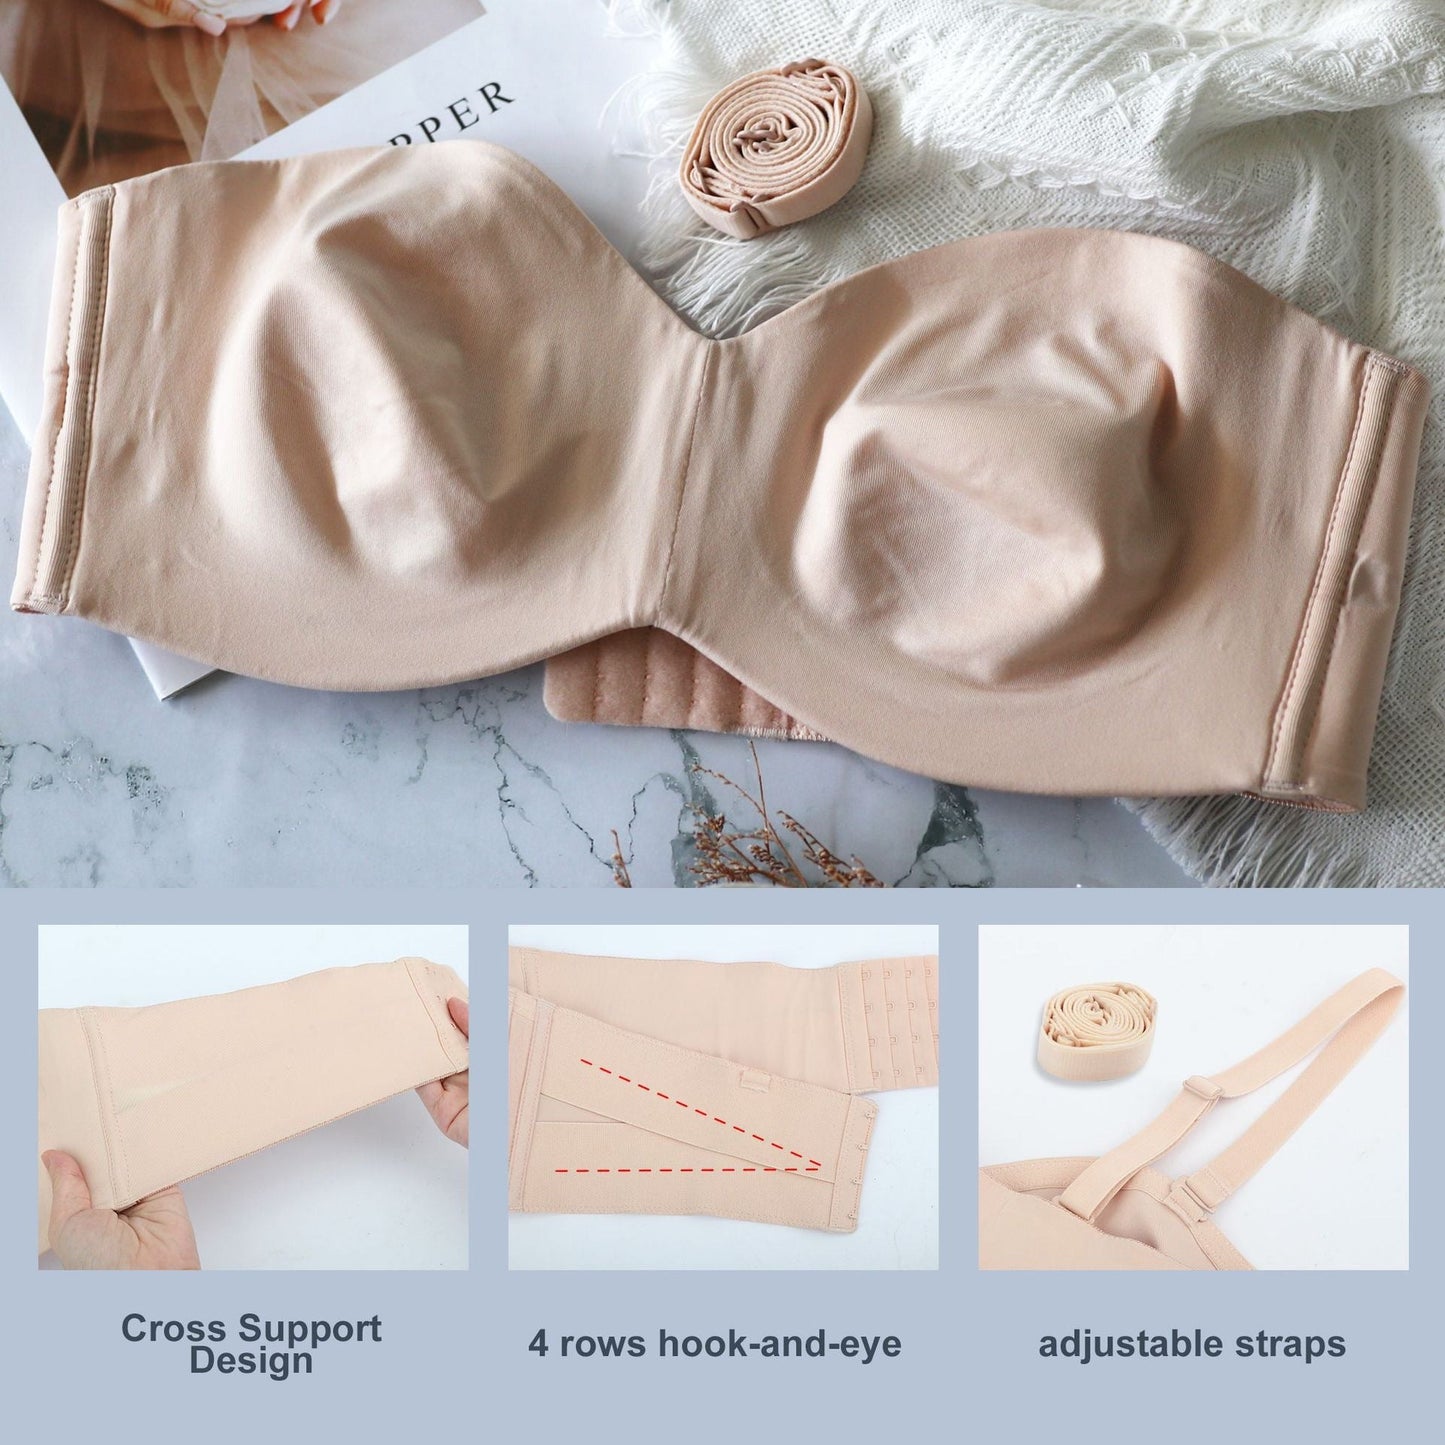 Underwear Seamless Invisible Bra Removable Push-up Strap Tube Top